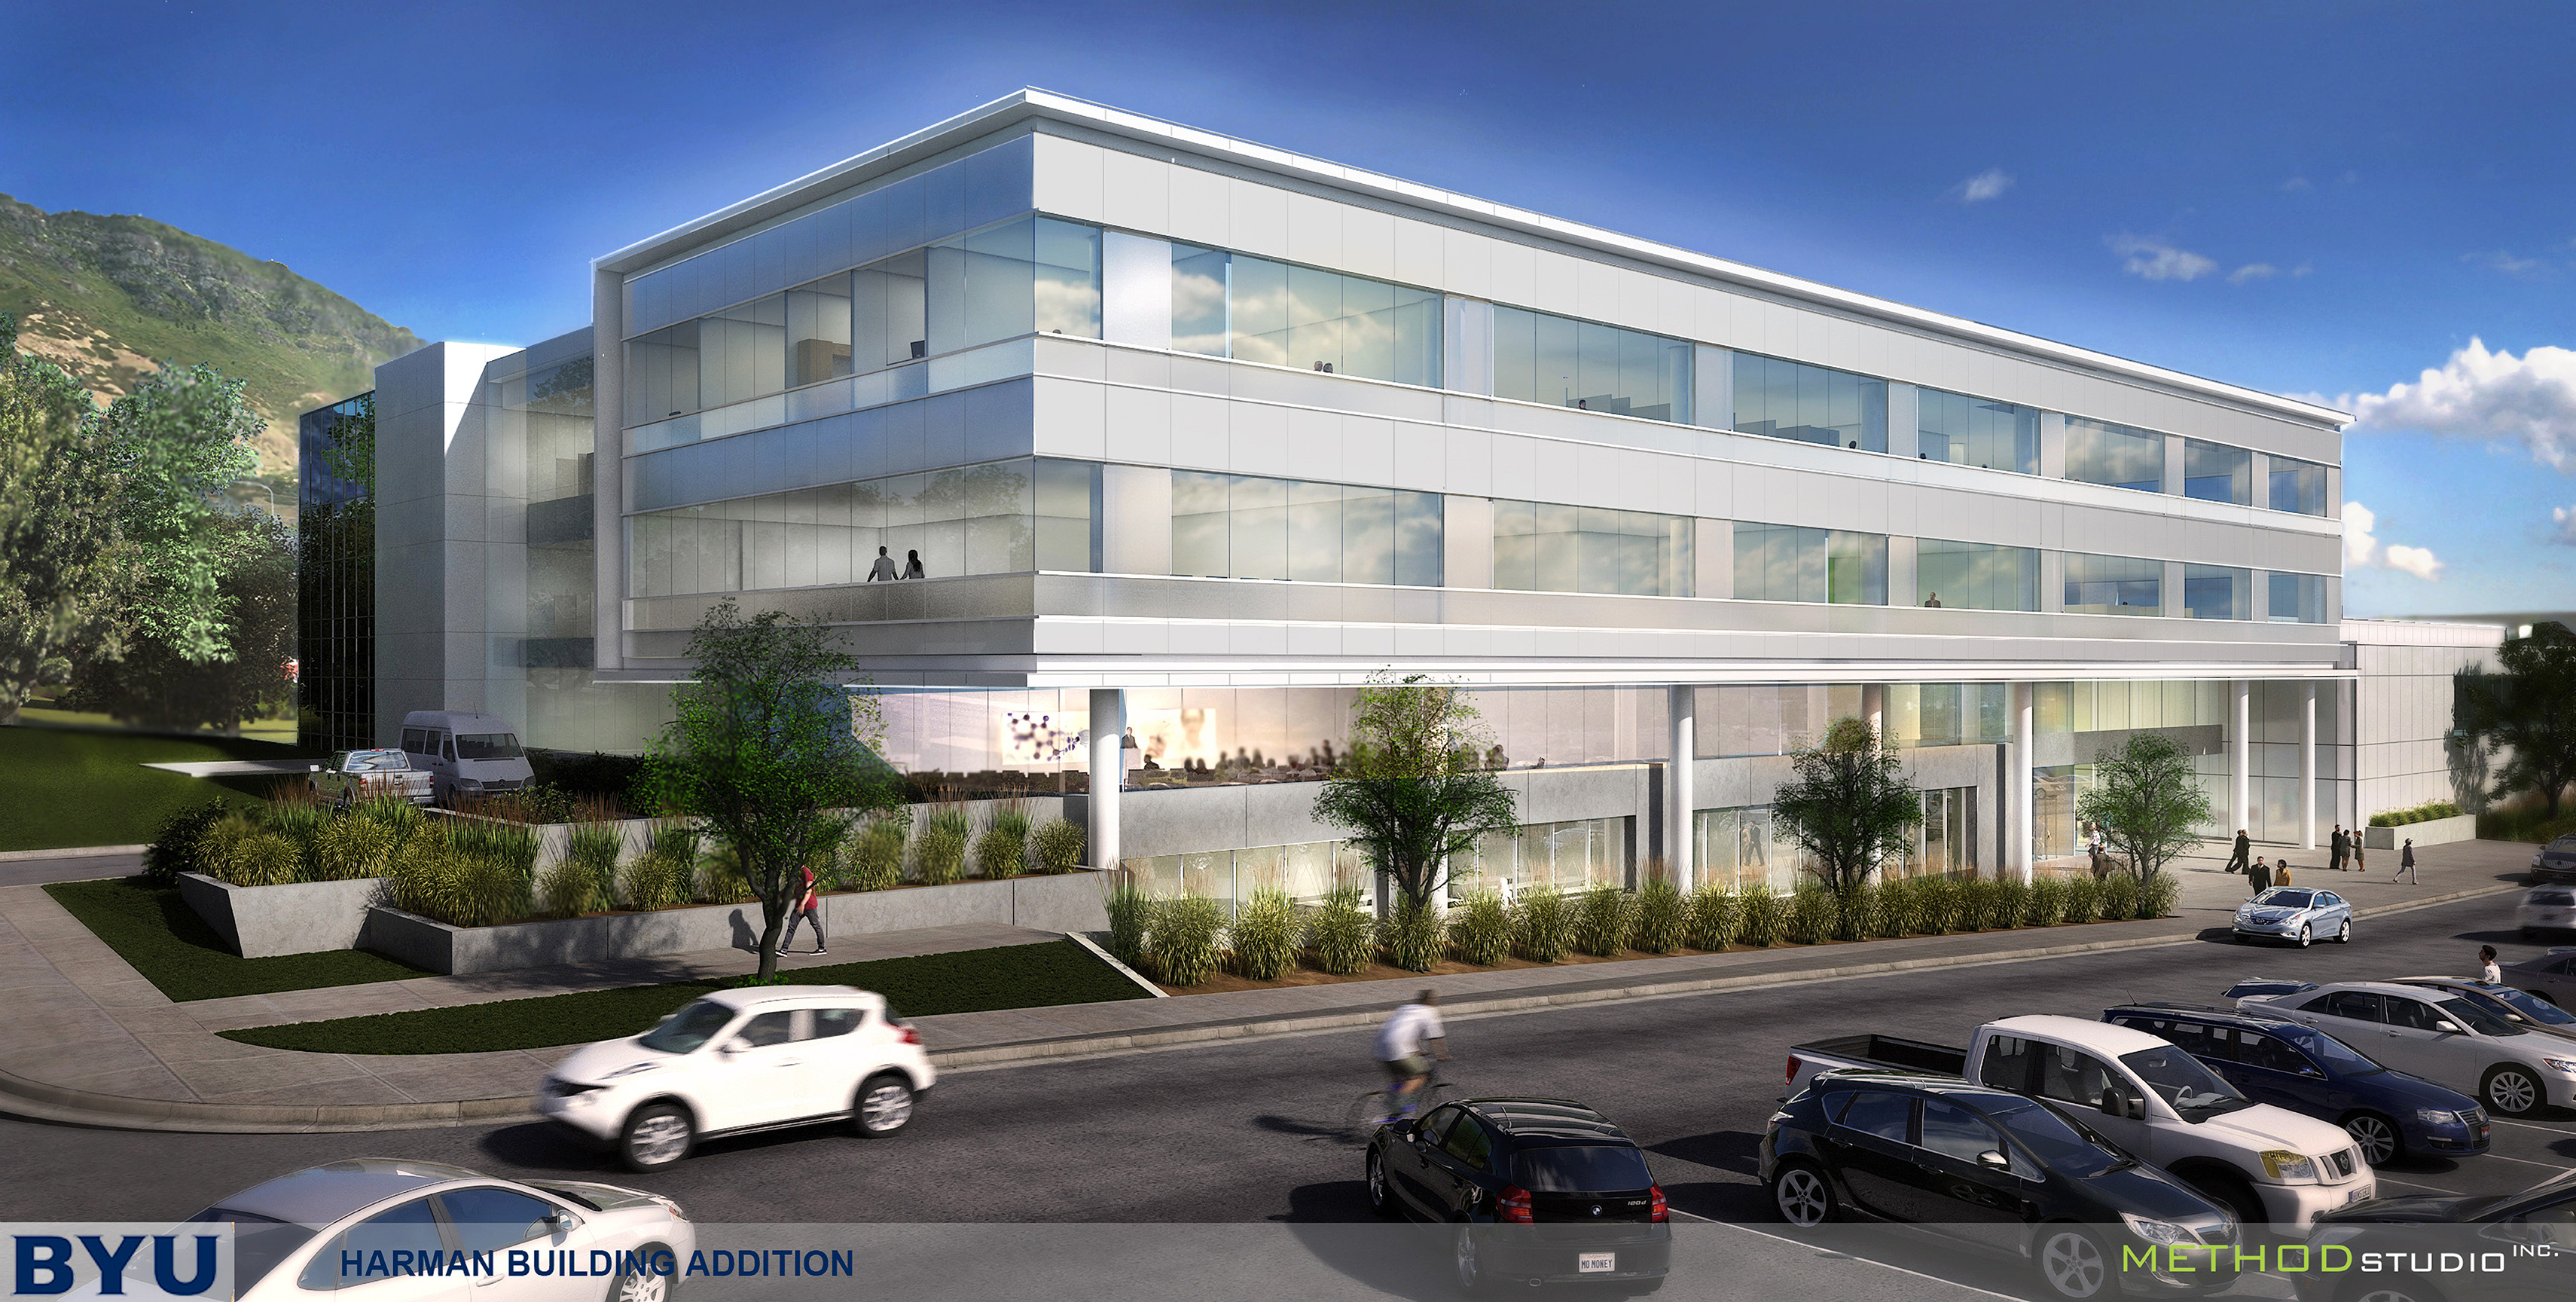 Rendering of the new addition to the Harman Building. (BYU)